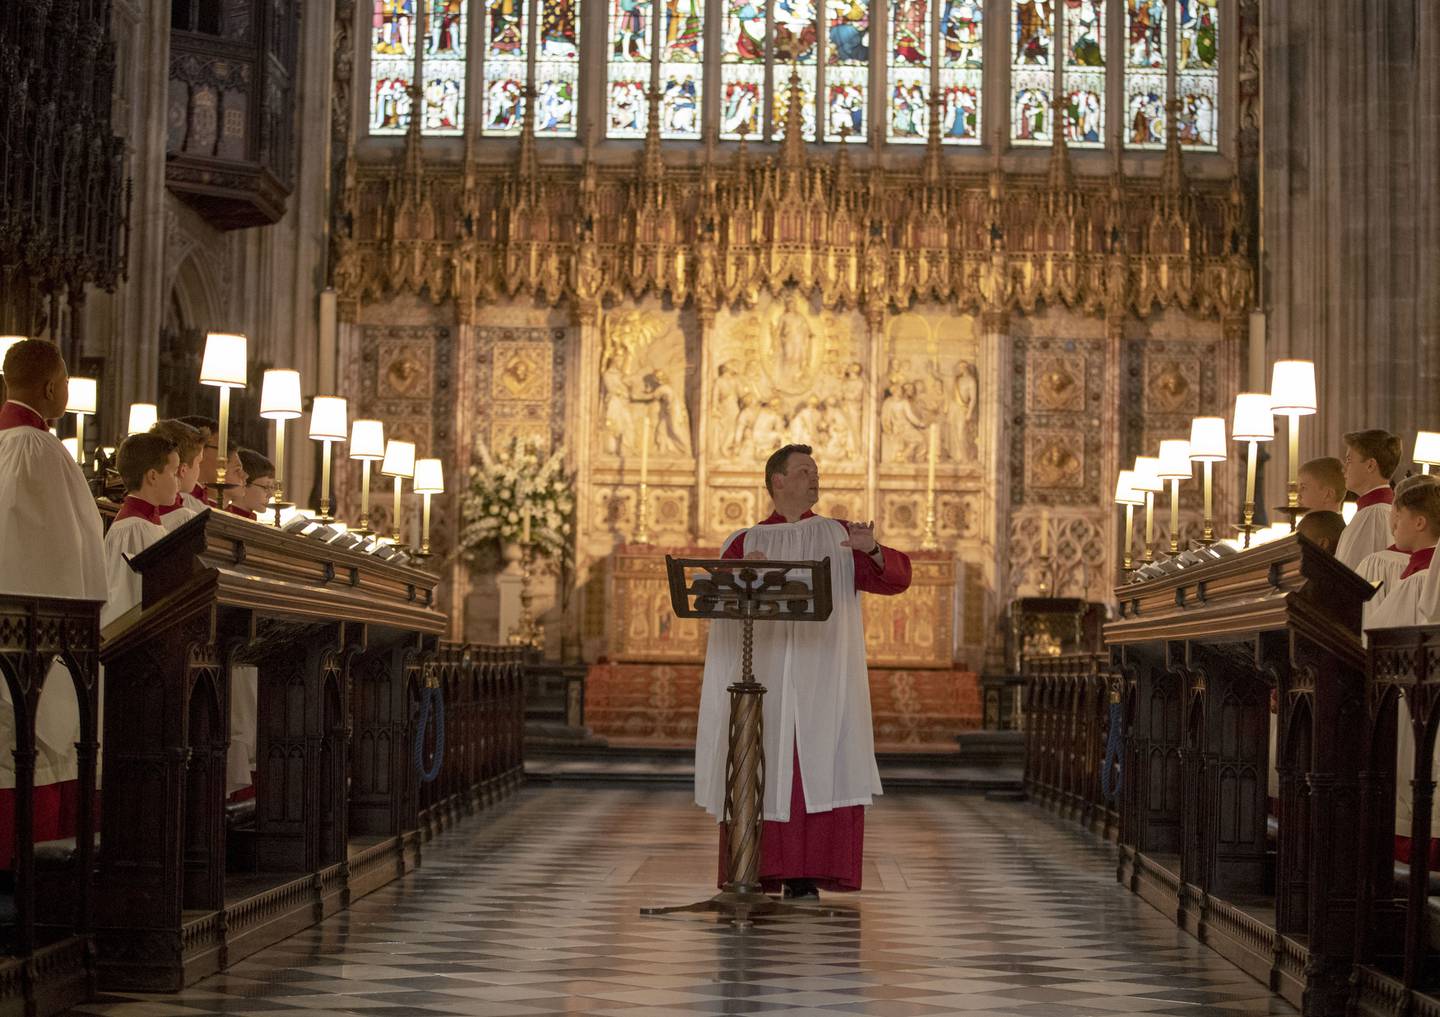 In this picture taken on Monday, May 14, 2018, James Vivian, Director of Music at St George's Chapel, directs the St. George's Chapel Choir during a rehearsal before evensong and ahead of the wedding of Prince Harry and Megan Markle this weekend, in Windsor, England. (Steve Parsons/Pool Photo via AP)